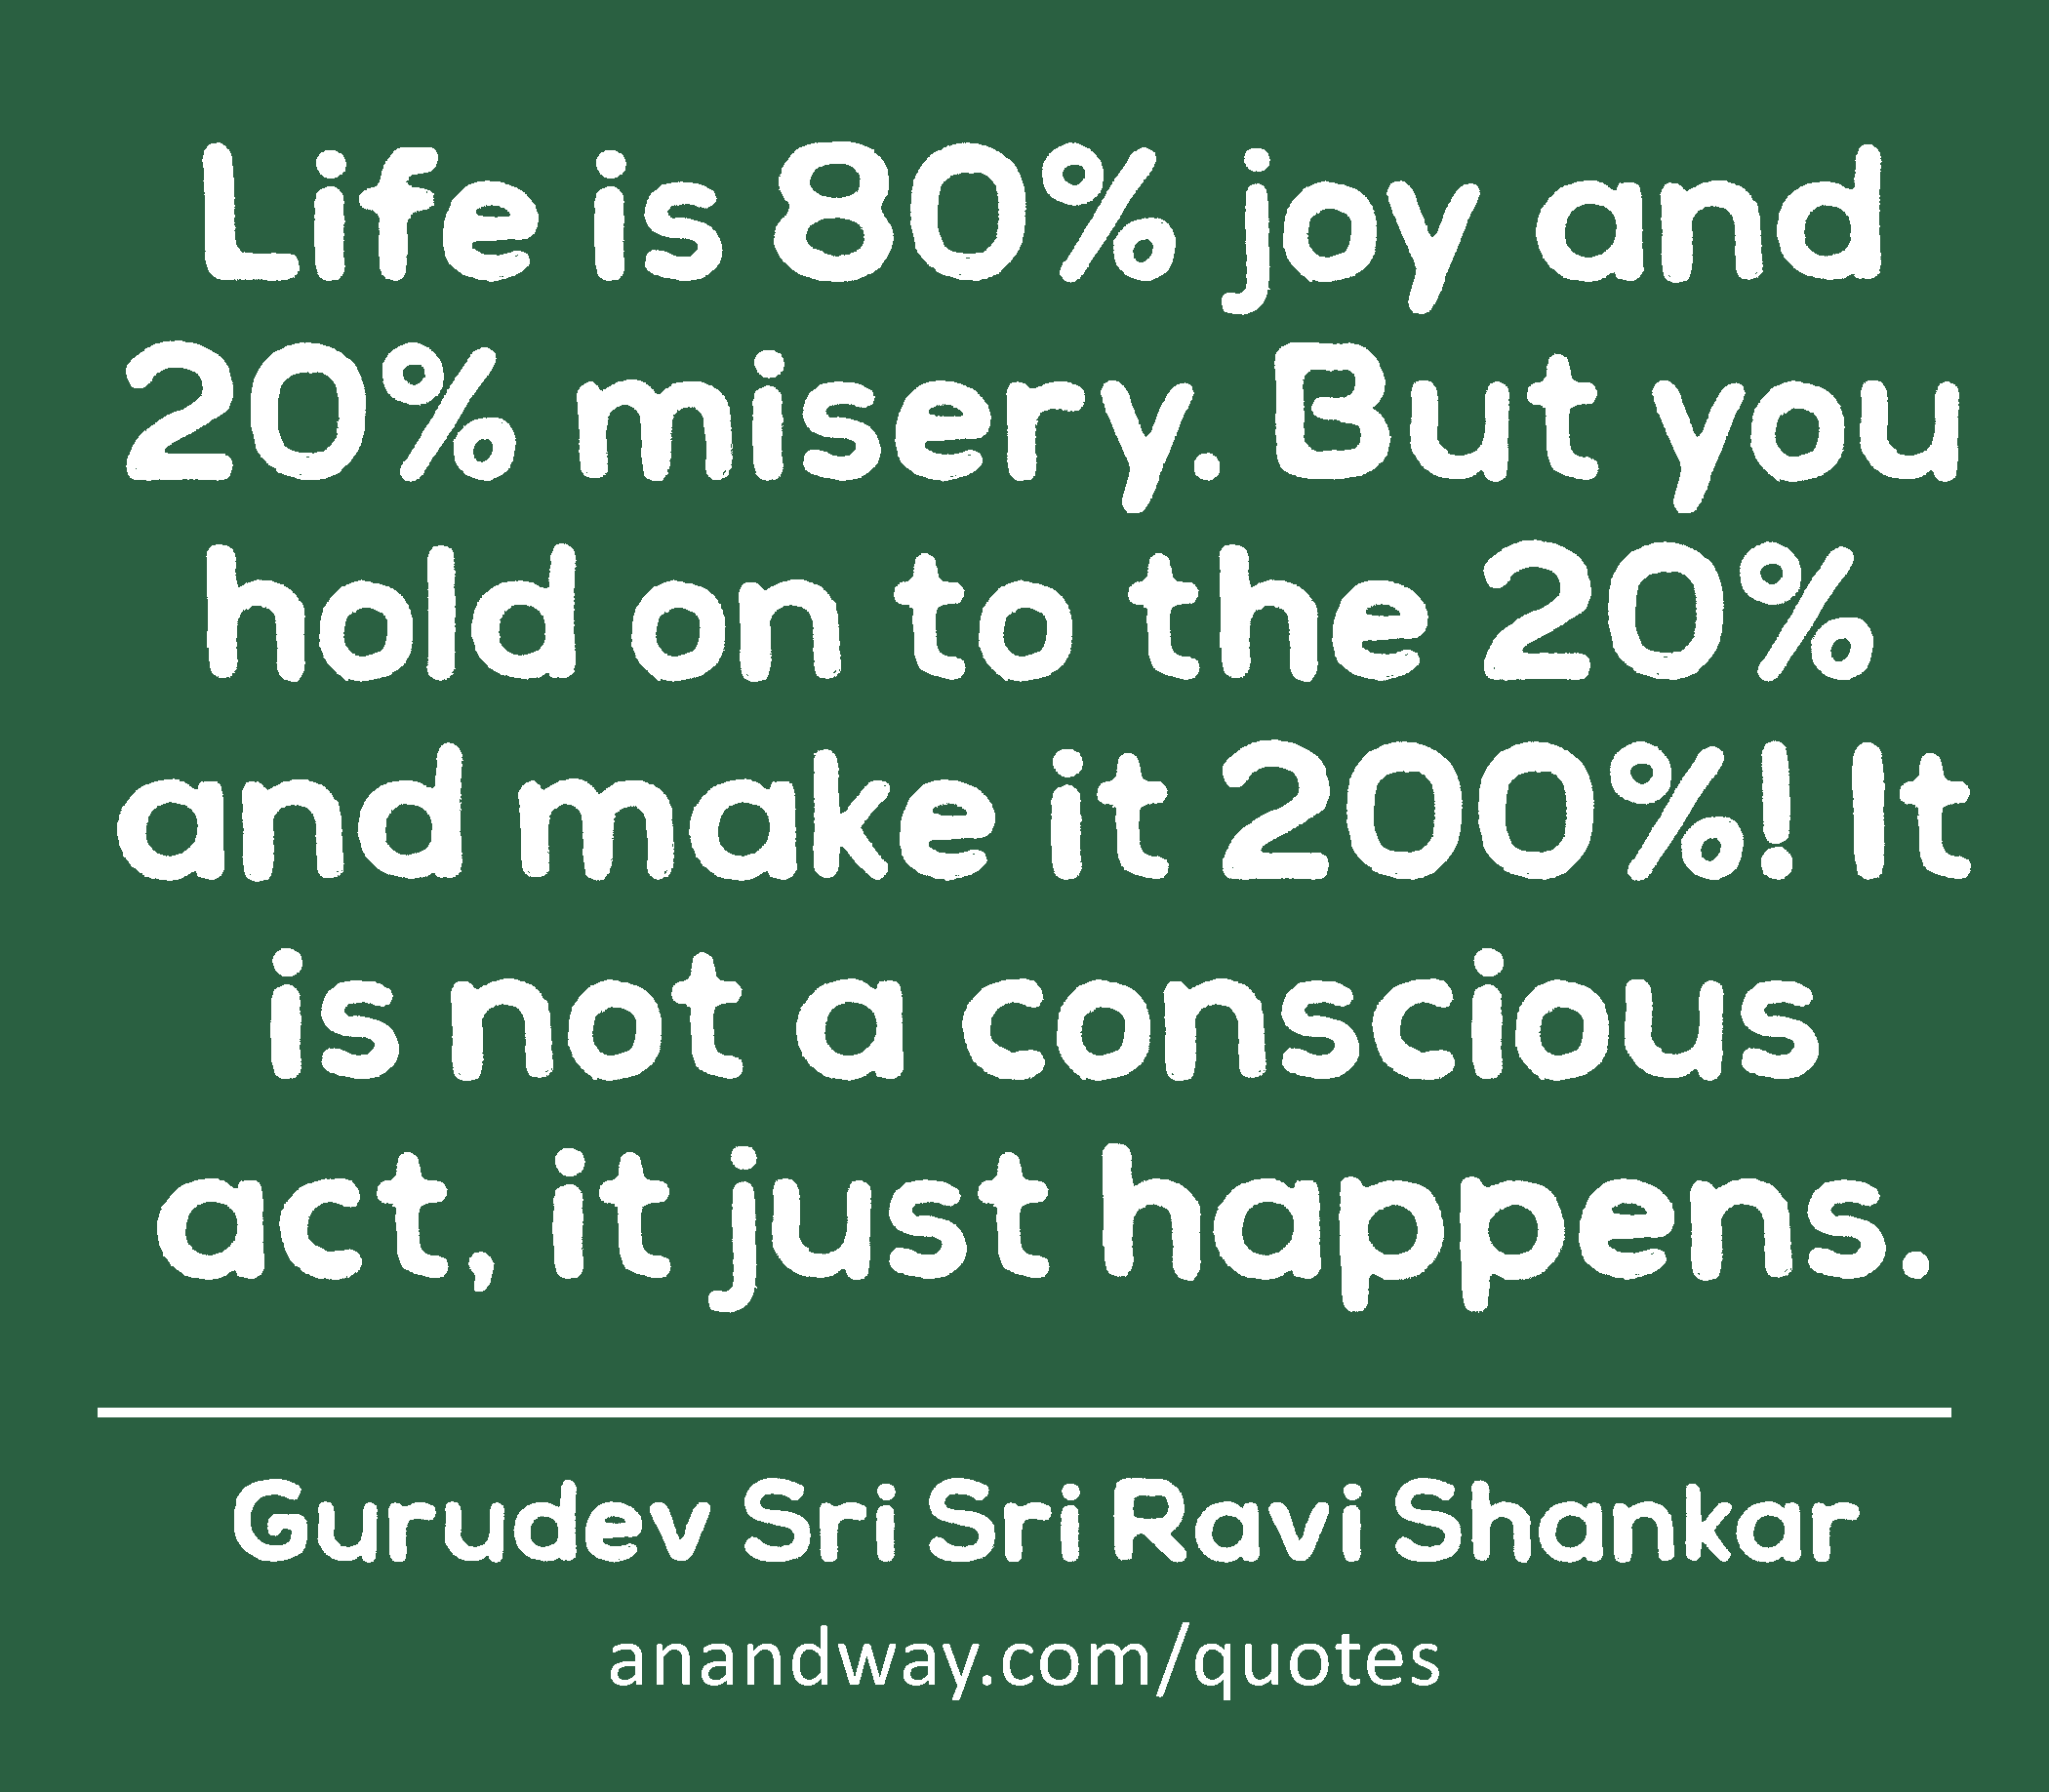 Life is 80% joy and 20% misery. But you hold on to the 20% and make it 200%! It is not a conscious
 -Gurudev Sri Sri Ravi Shankar